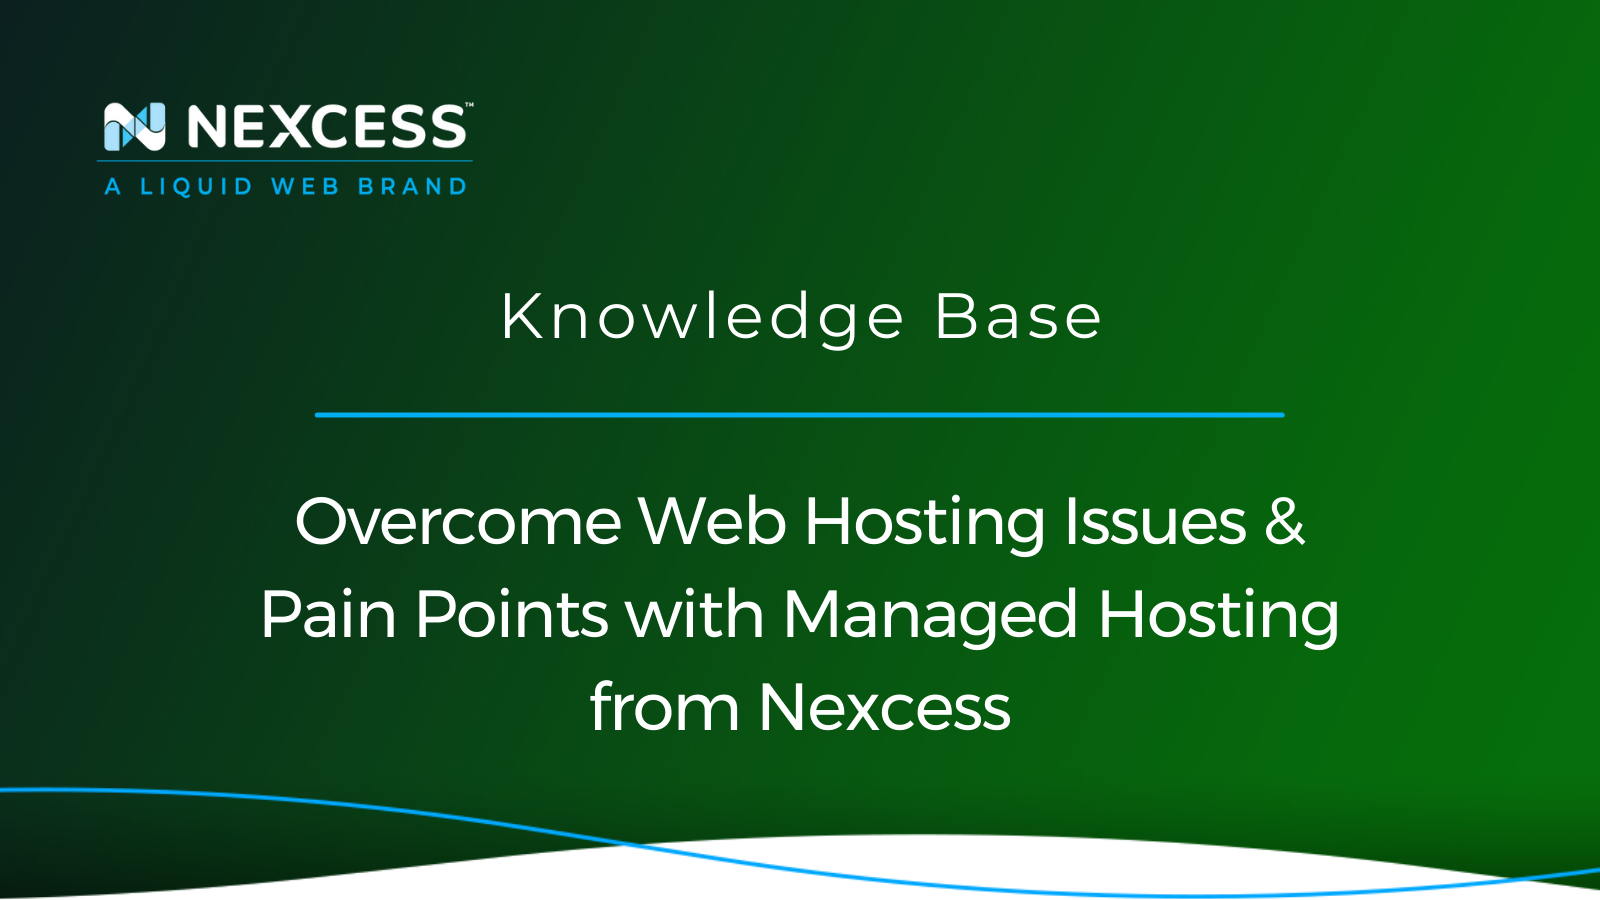 Overcome Web Hosting Issues & Pain Points with Managed Hosting from Nexcess